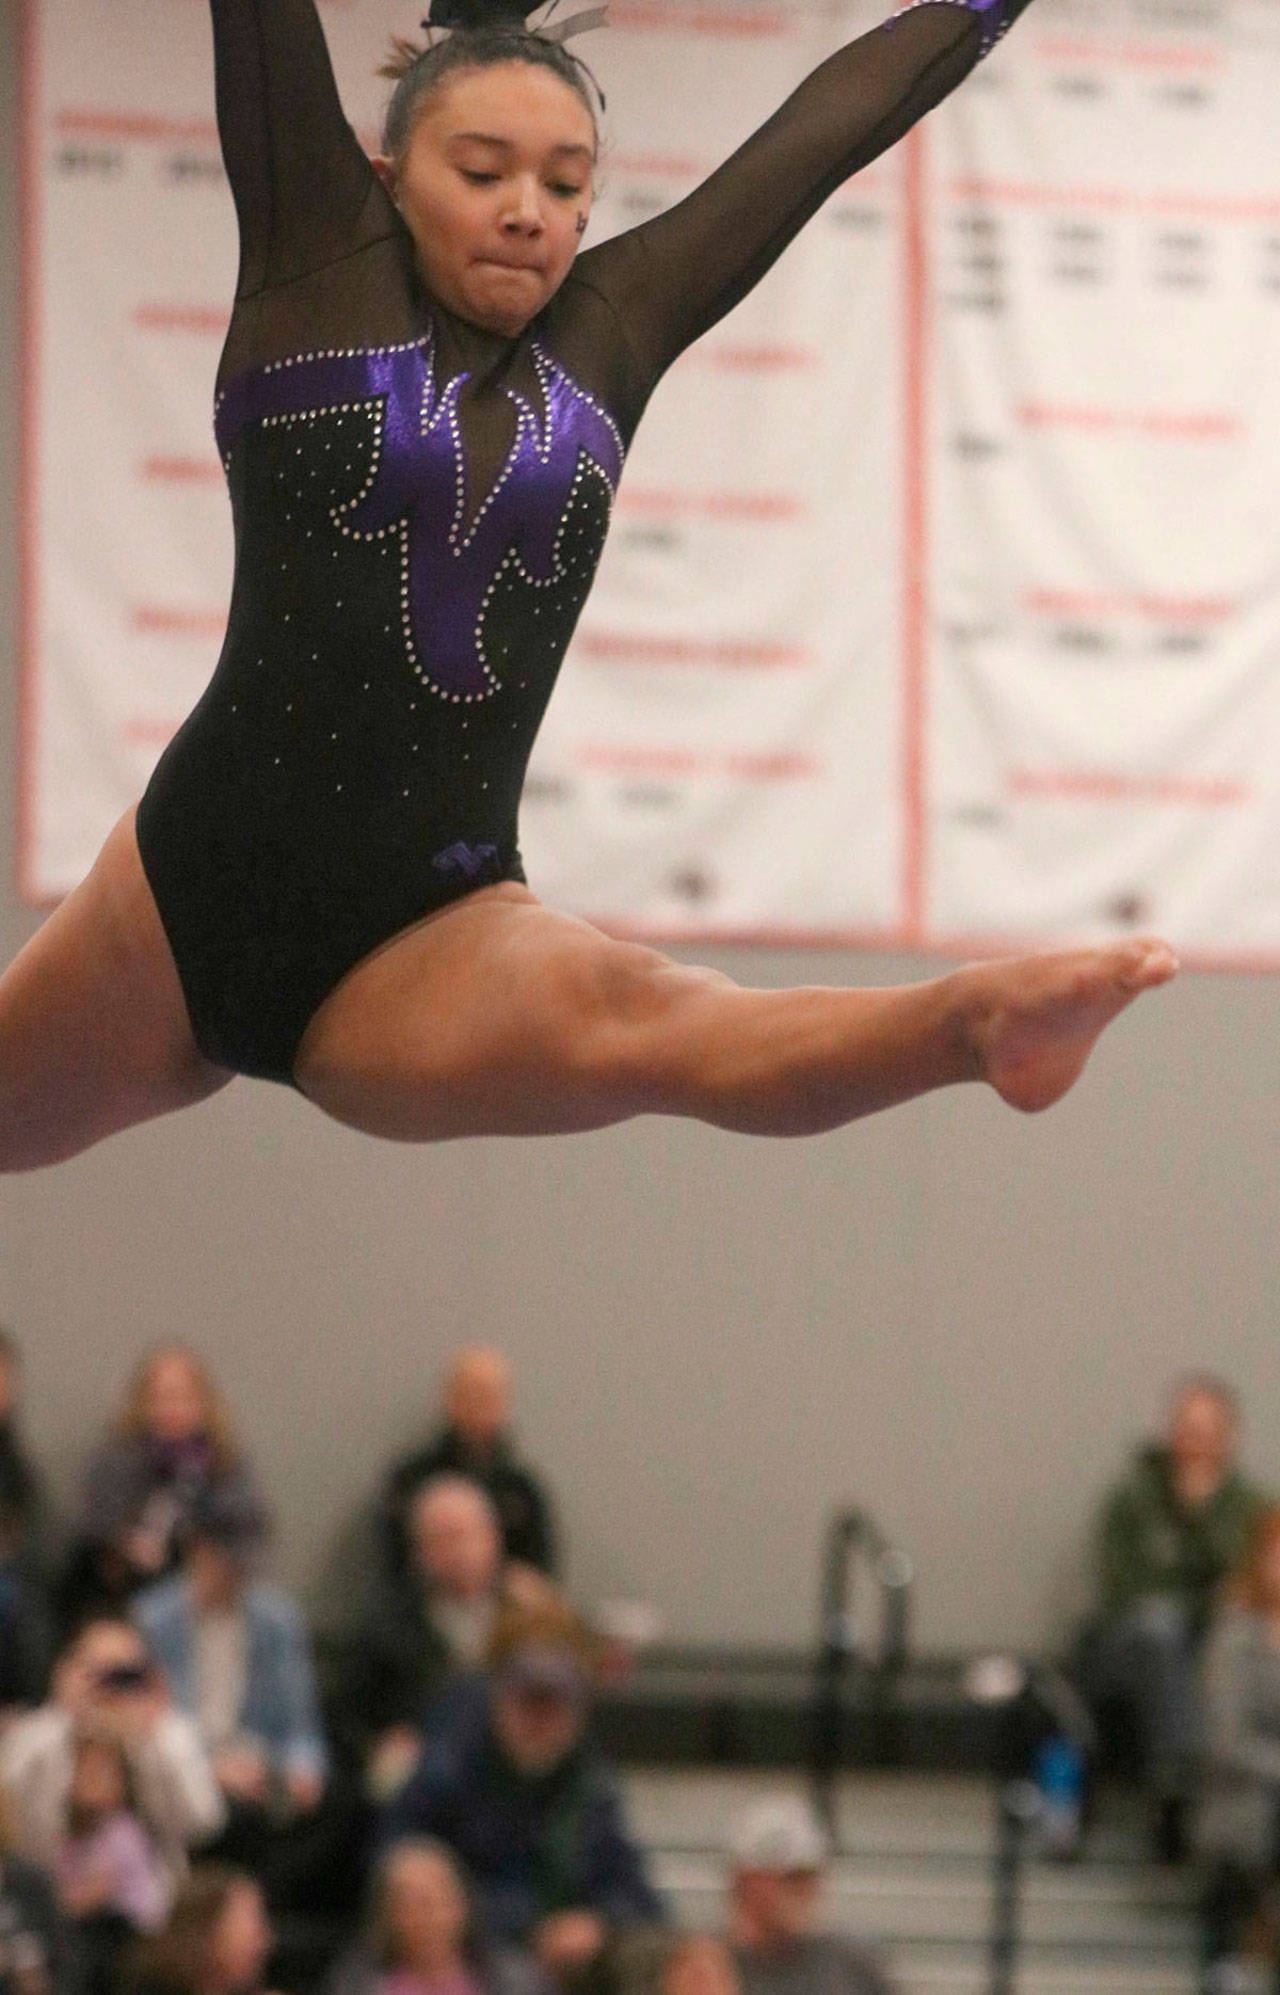 Lake Washington’s Laly Noriega gets some air time on beam at last season’s state meet. Andy Nystrom / staff photo